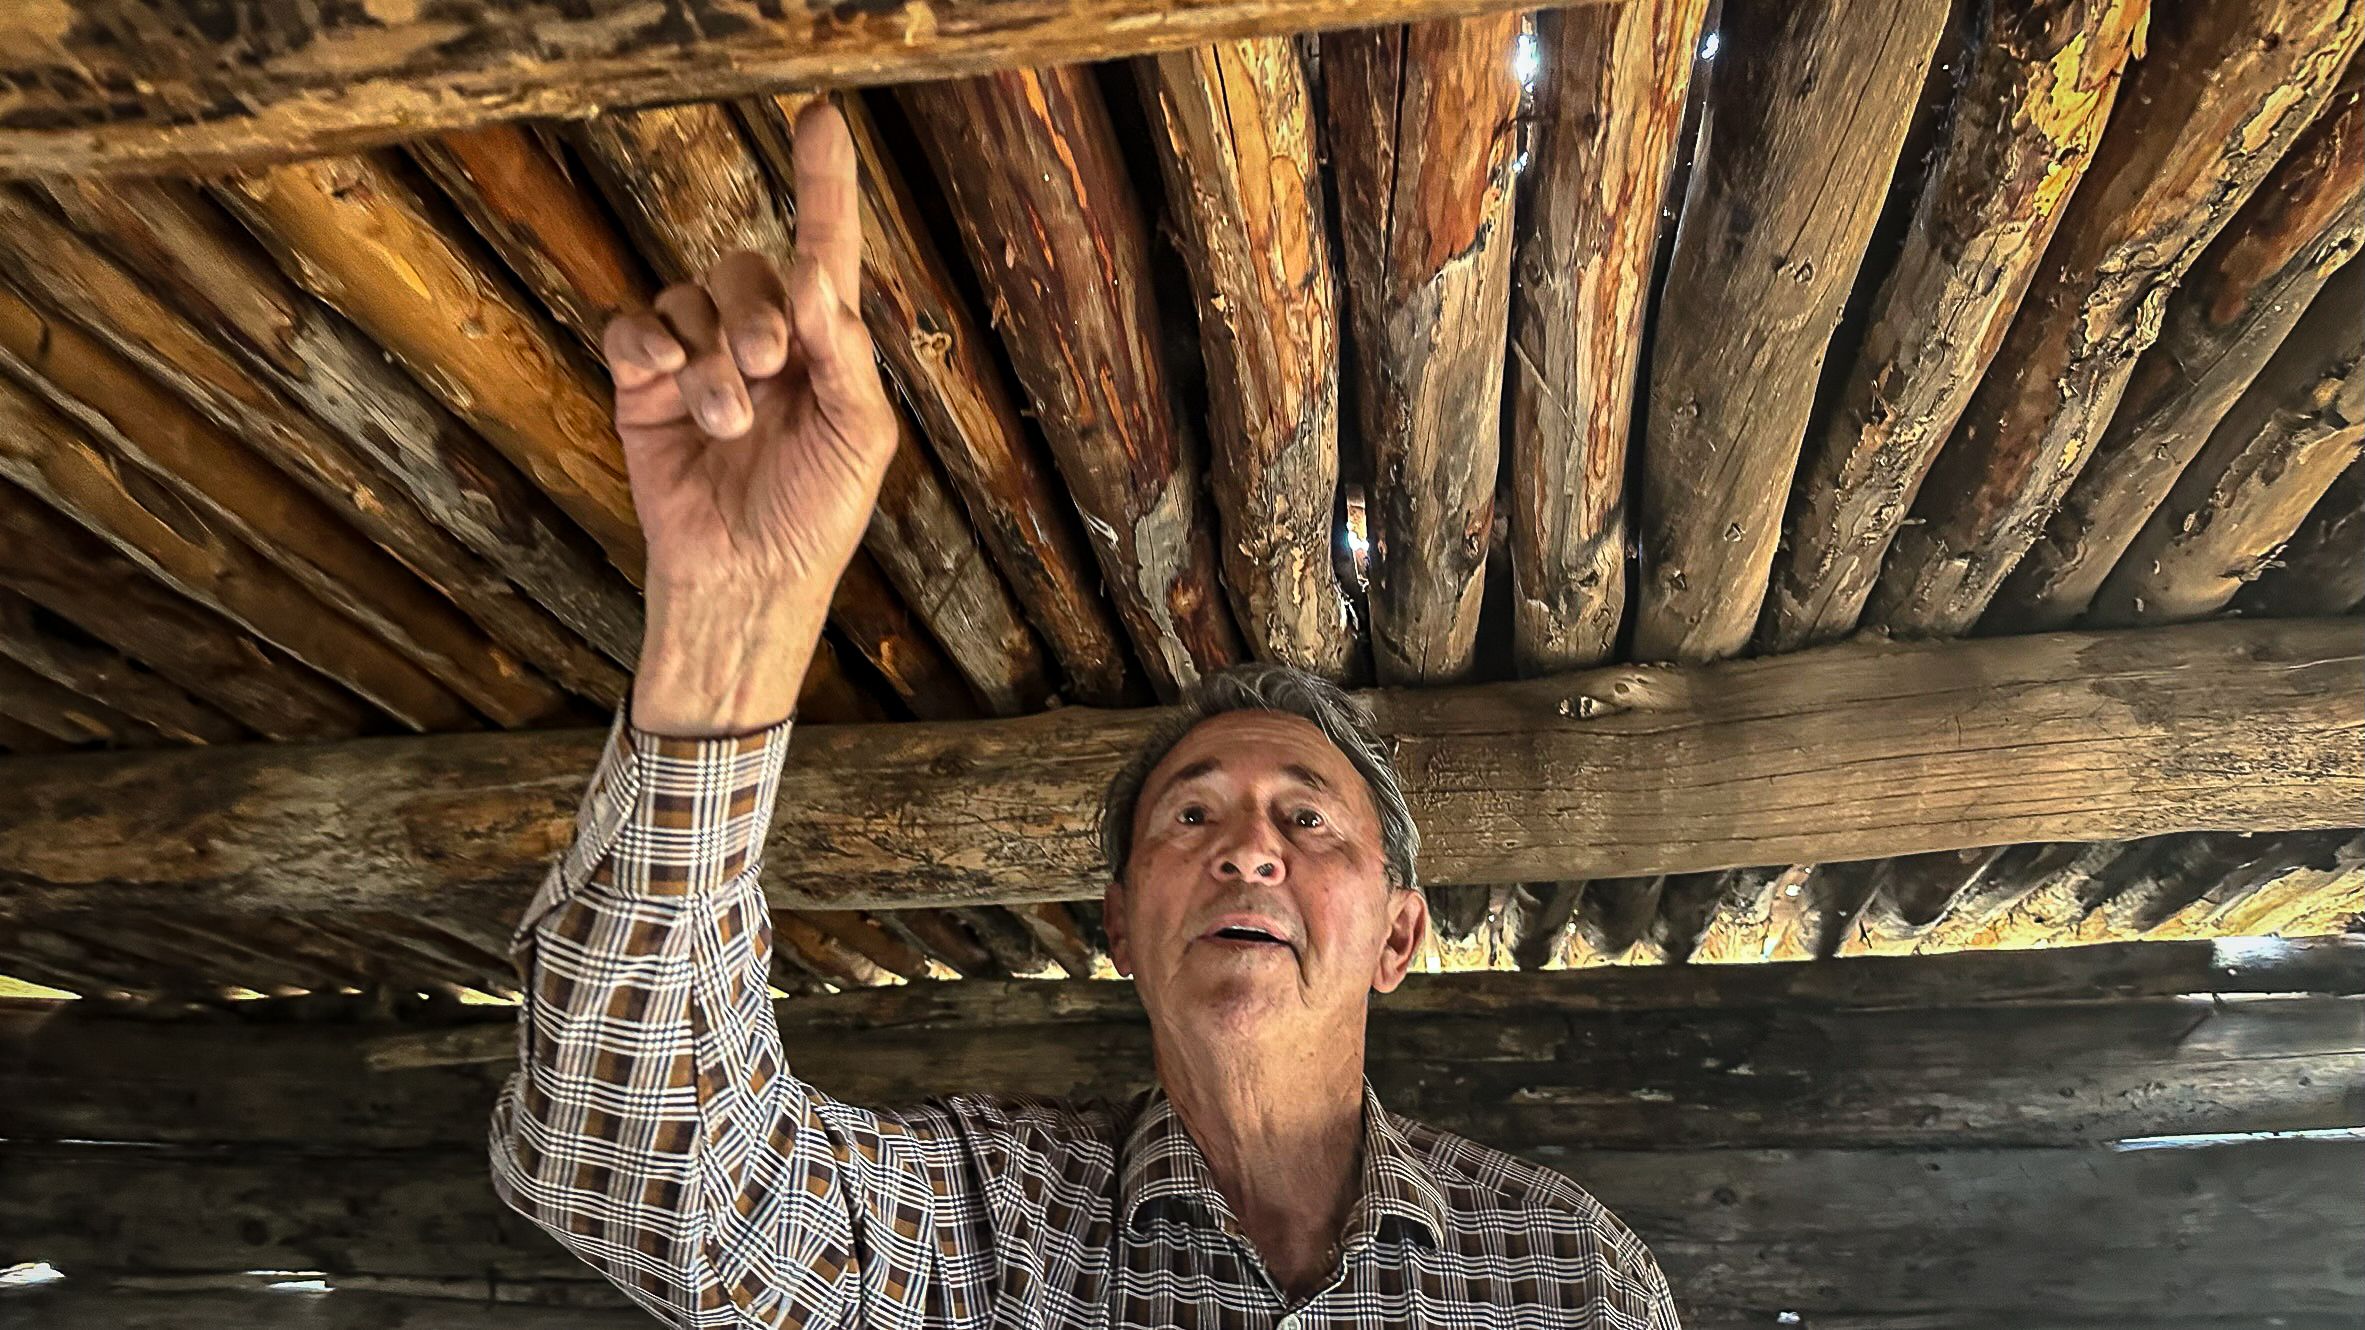 Moises Morales Jr., a rancher in Canjilon, New Mexico, shows the etchings his grandfather made in a cabin he built in the 1930s in the Carson National Forest.